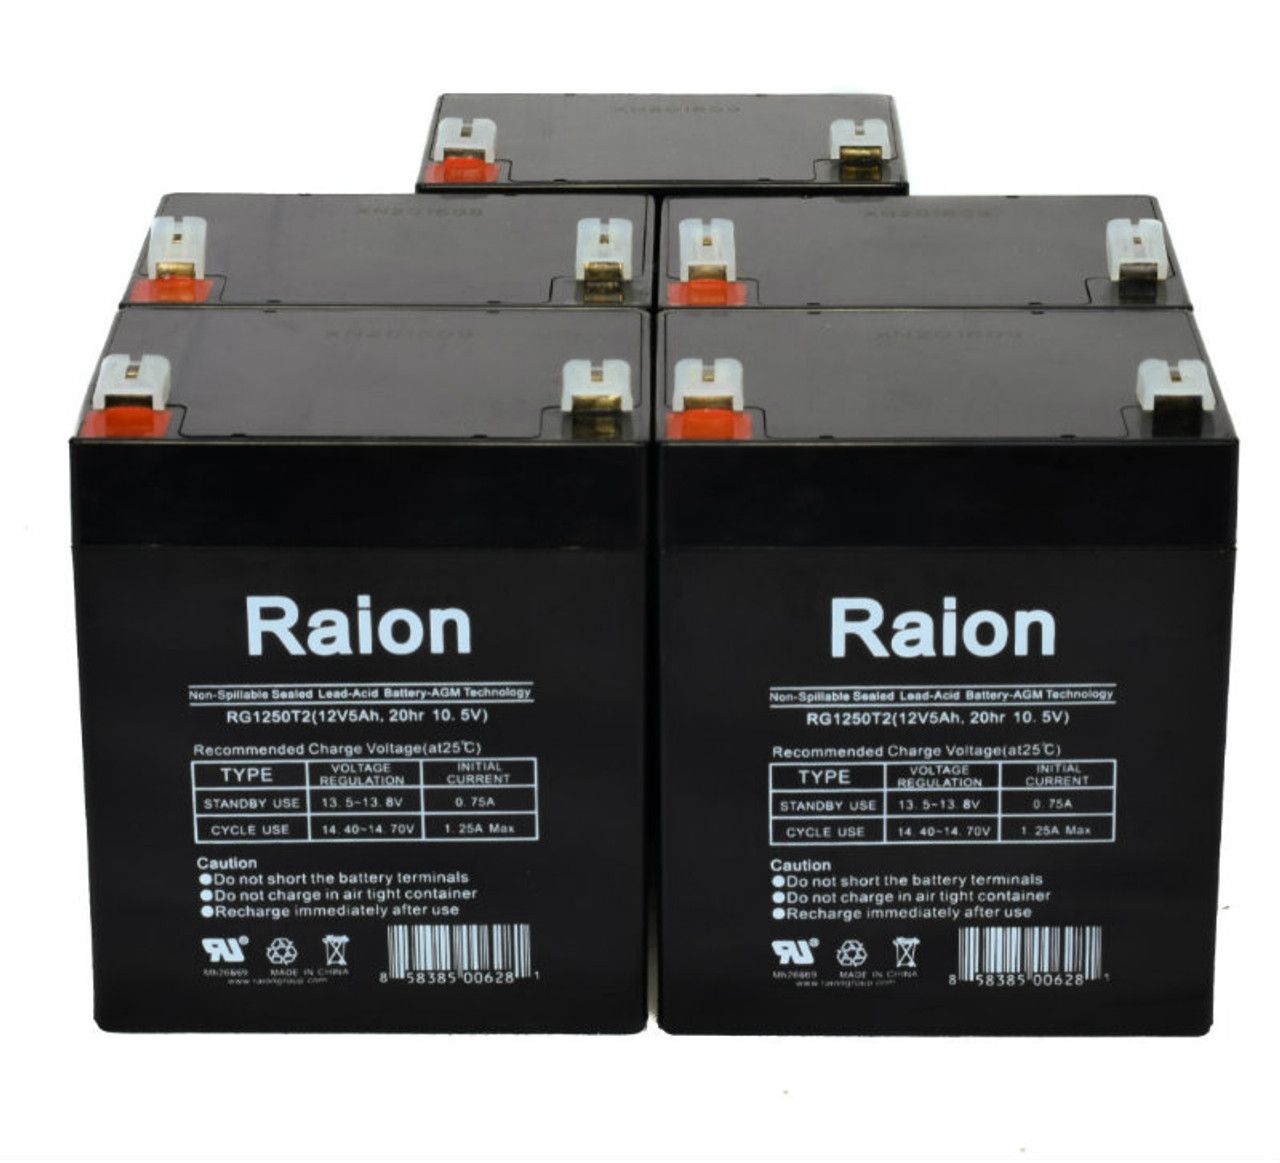 Raion Power RG1250T1 Replacement Fire Alarm Control Panel Battery for Napco Alarms MA1000E4LB - 5 Pack